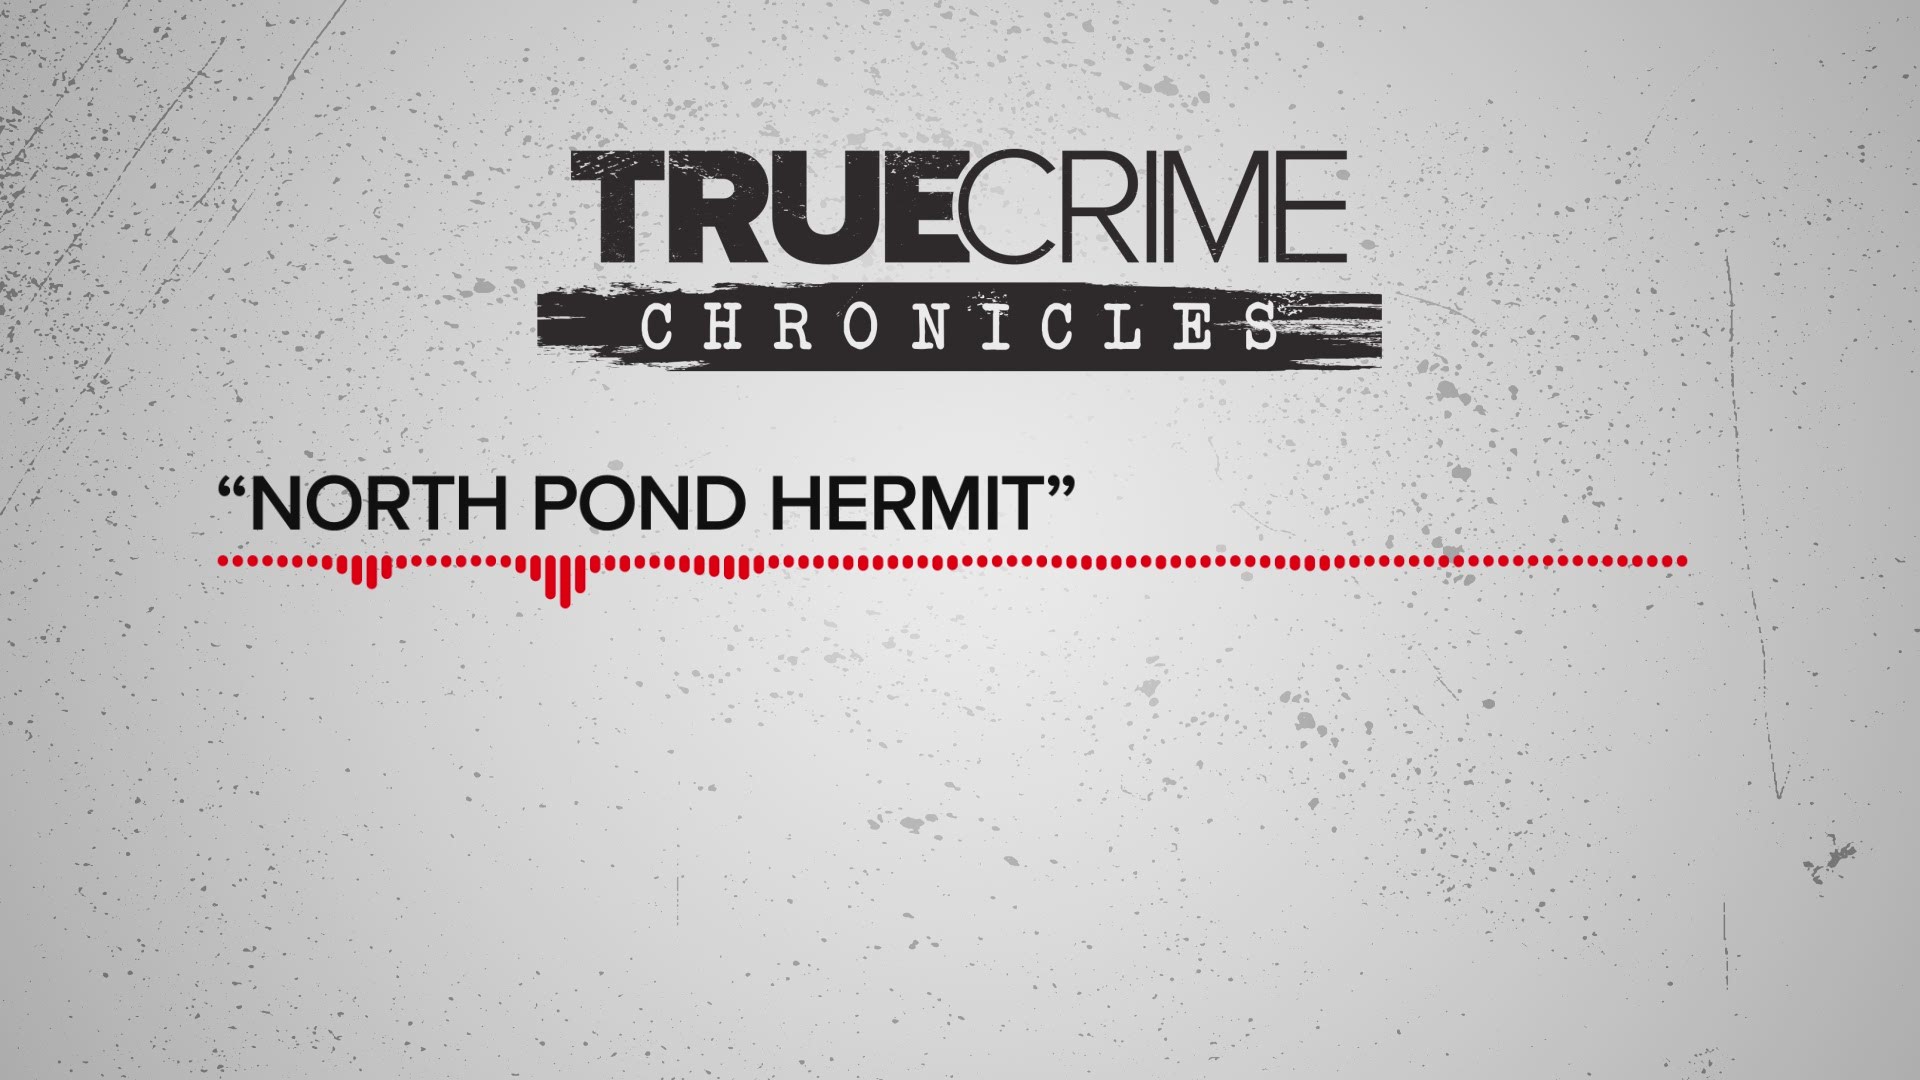 Former NEWS CENTER Maine reporter Chris Rose talks about the North Pond Hermit. Monday's True Crime Chronicles podcast highlights the odd story from the Maine woods